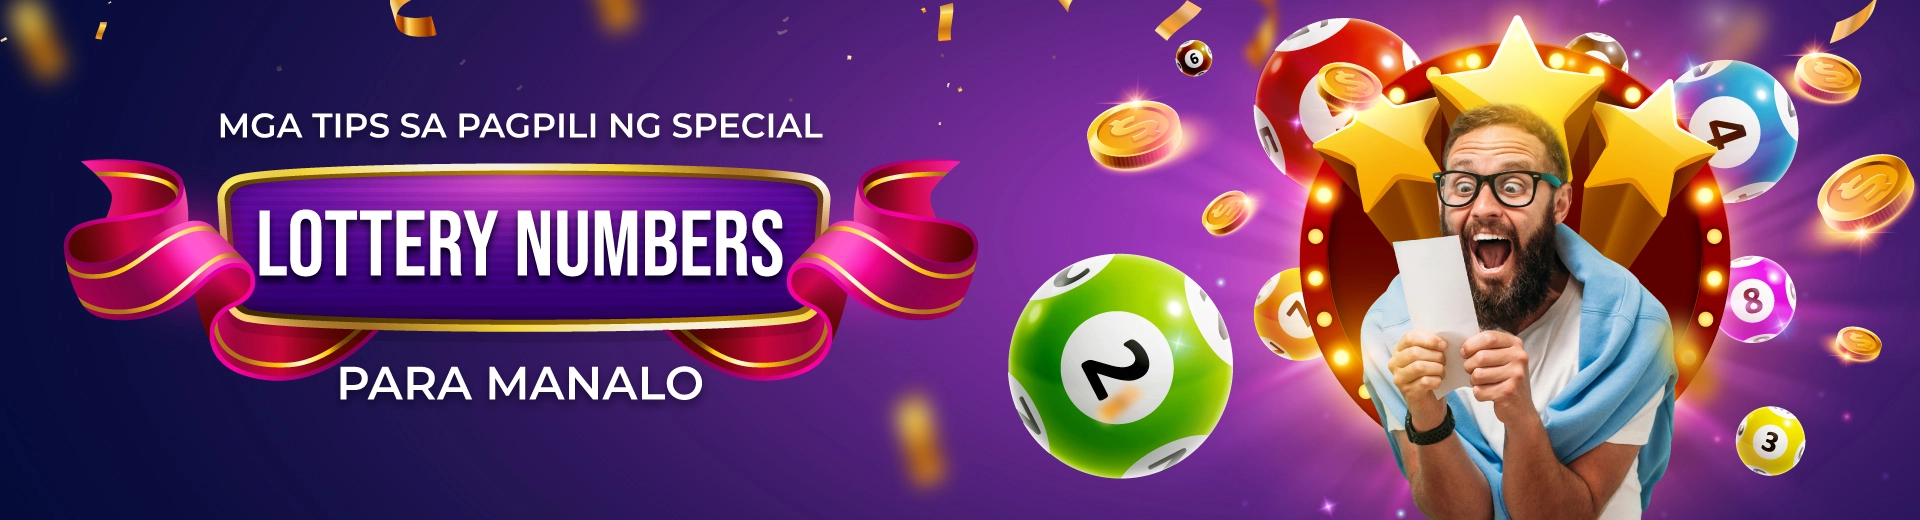 OKBET special lottery numbers